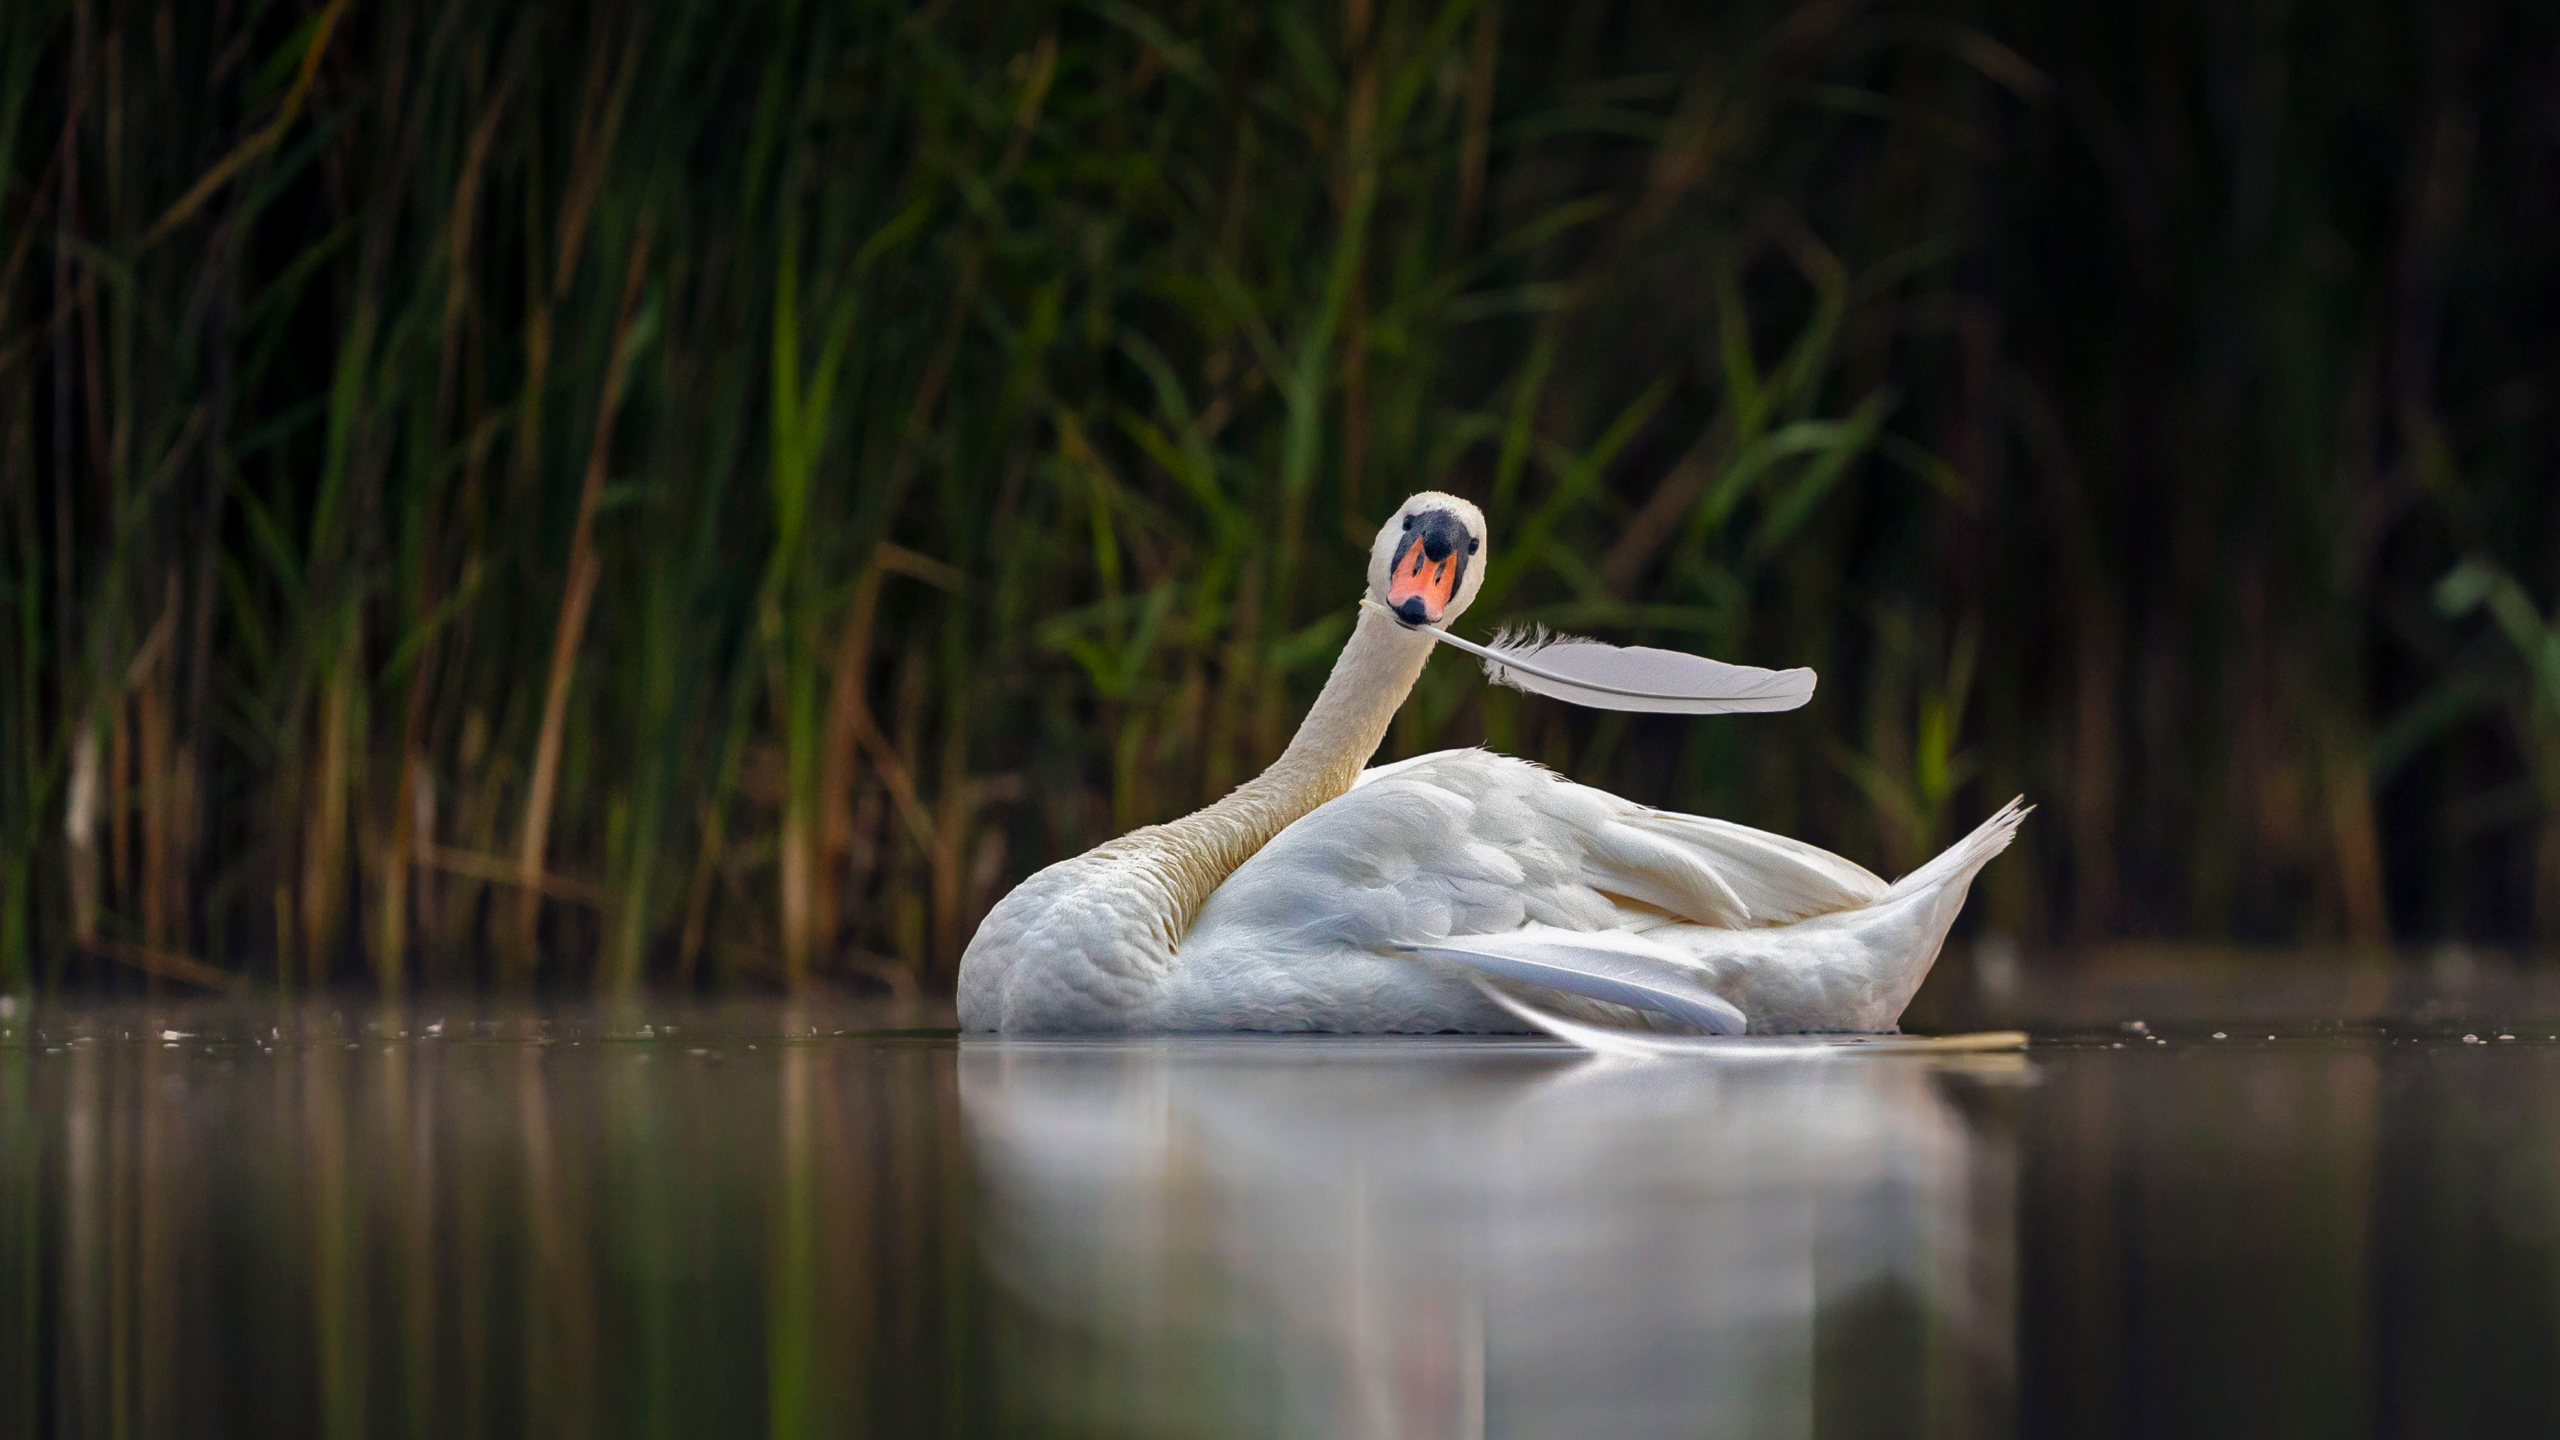 Nature Plants Water Swans White Birds Feathers Depth Of Field Bing Animals Reflection Outdoors 2560x1440